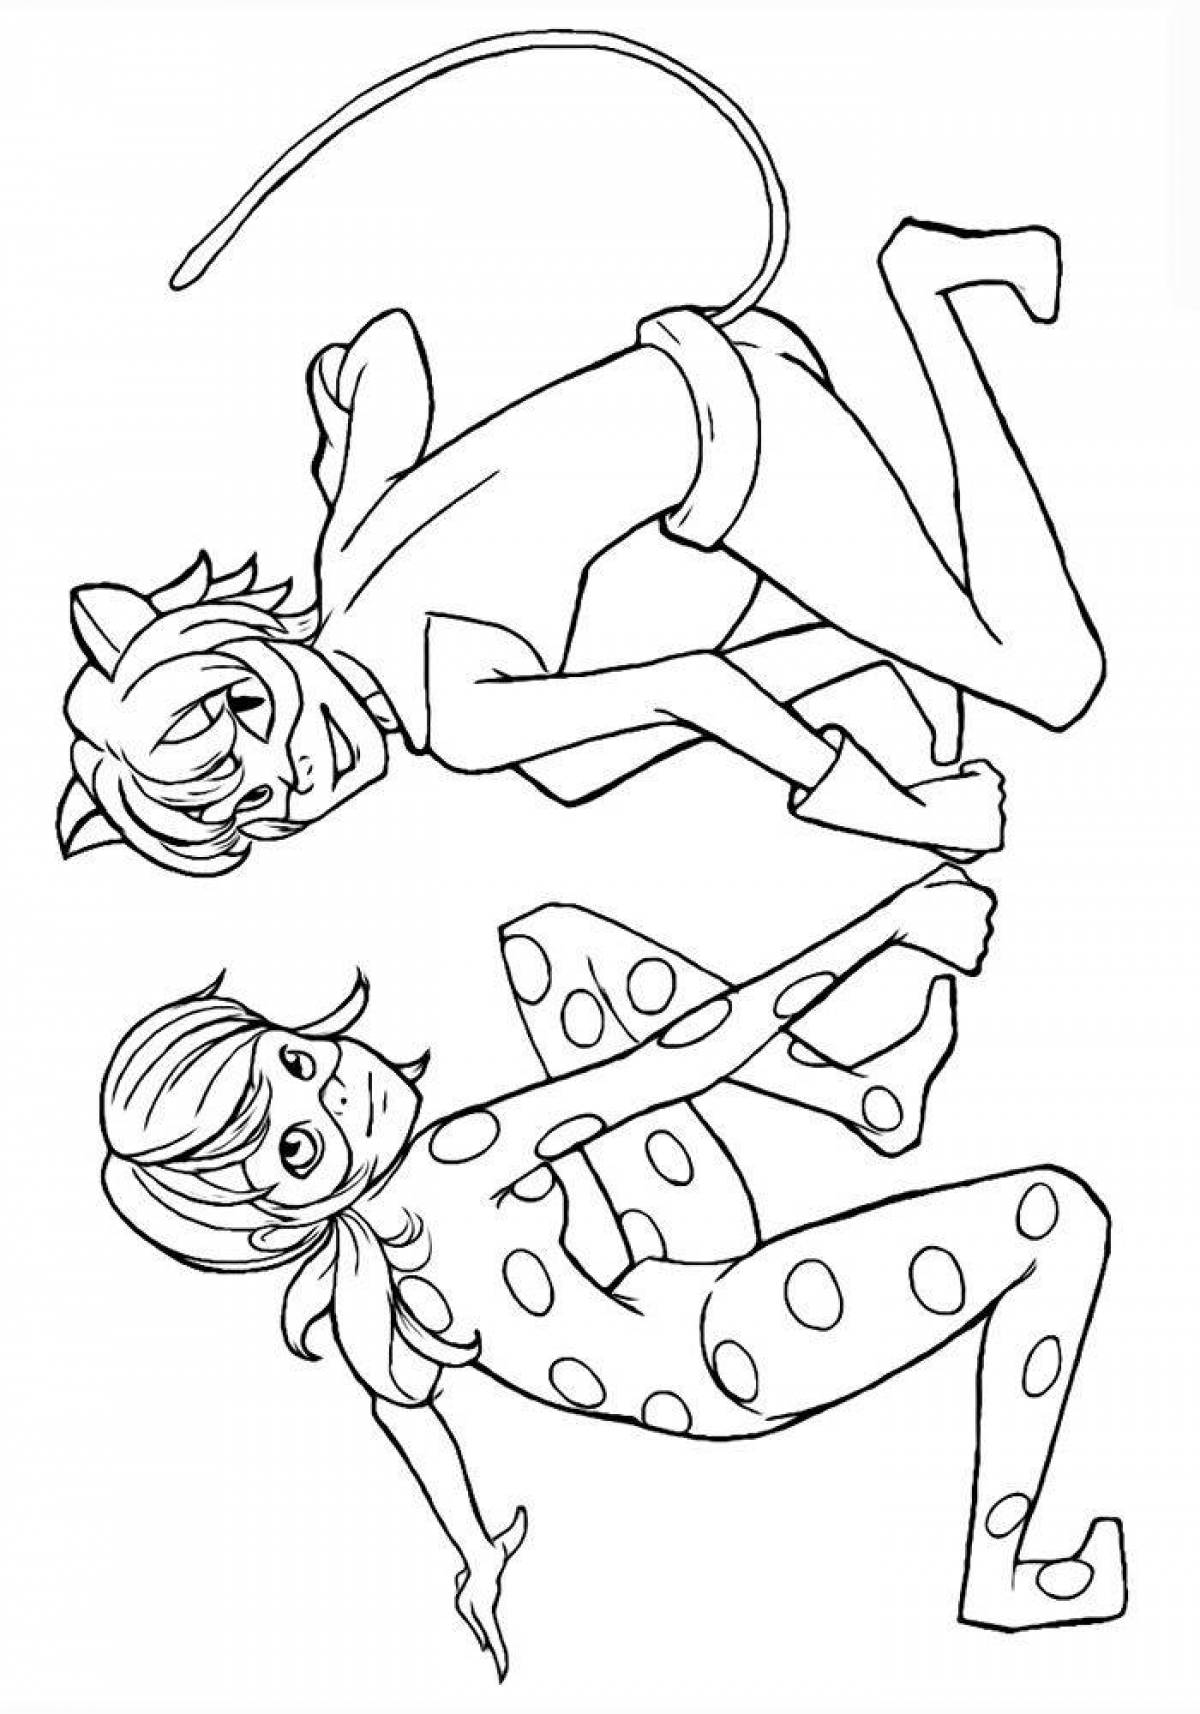 Coloring page cheeky super cat